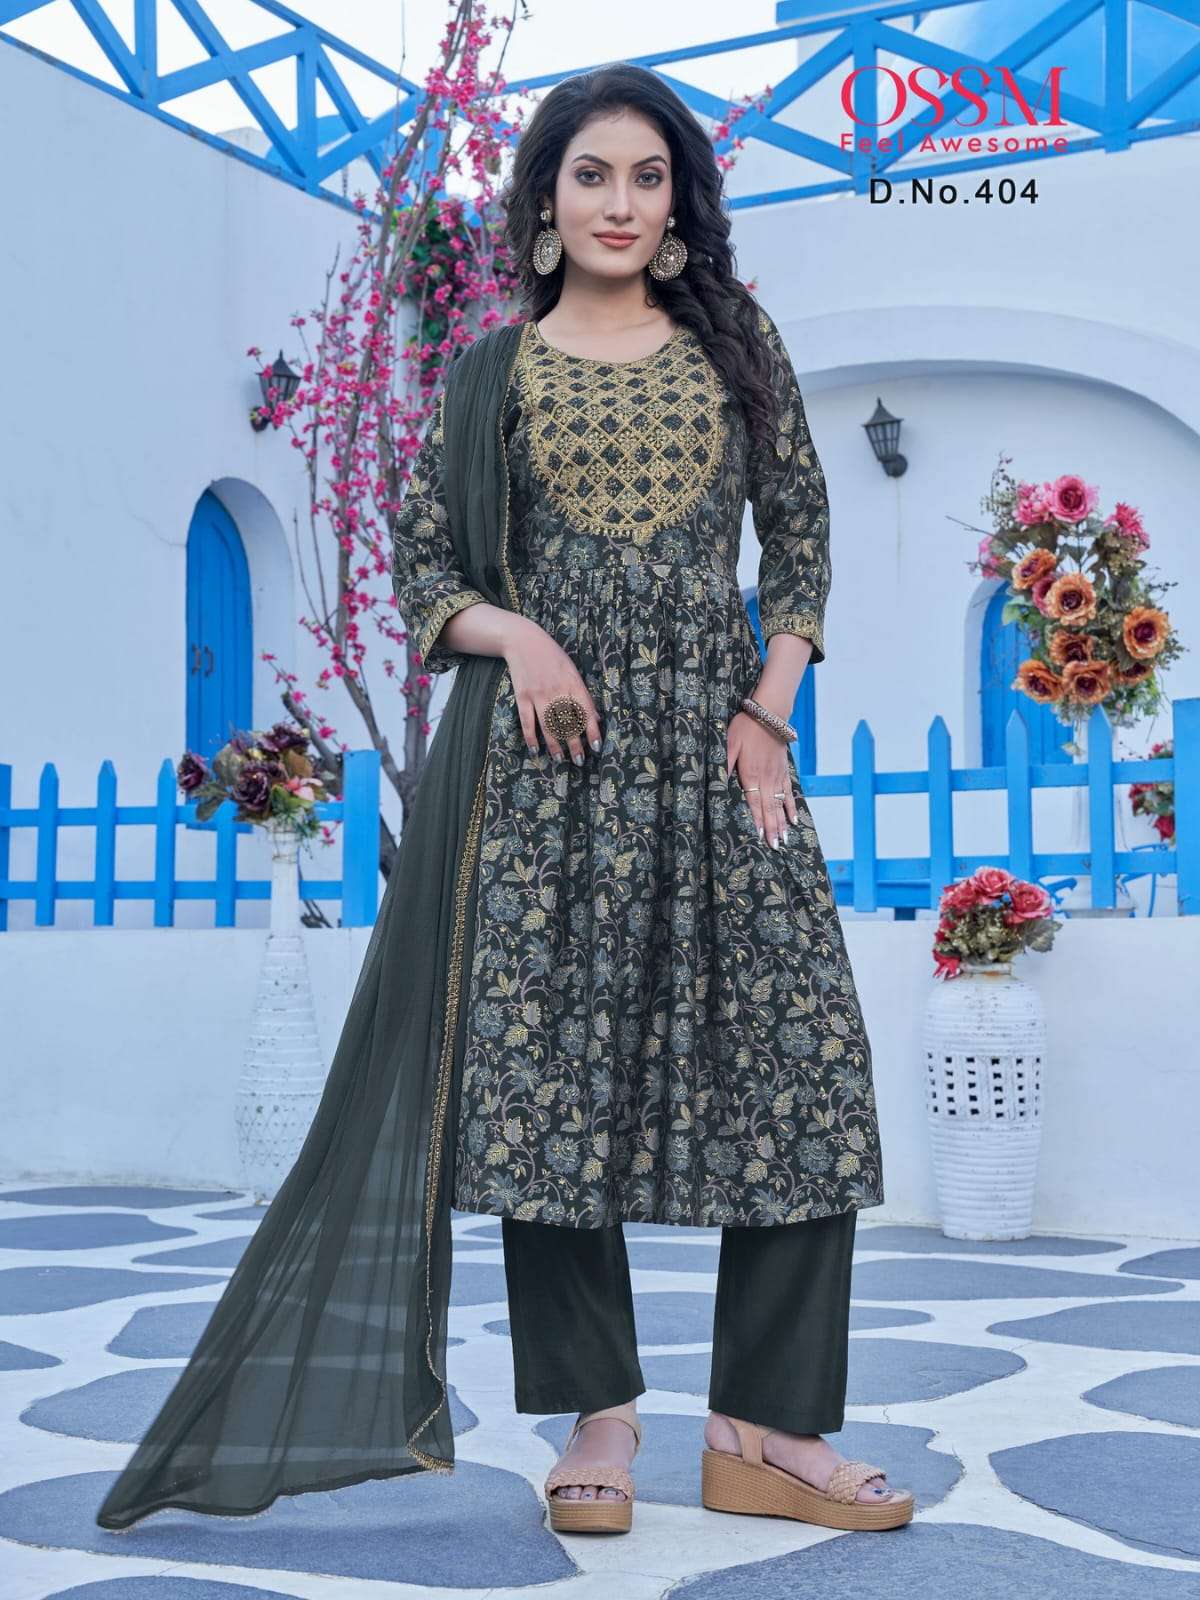 Mannat Vol-4 By Ossm 401 To 406 Series Beautiful Suits Colorful Stylish Fancy Casual Wear & Ethnic Wear Modal Chanderi Print Dresses At Wholesale Price